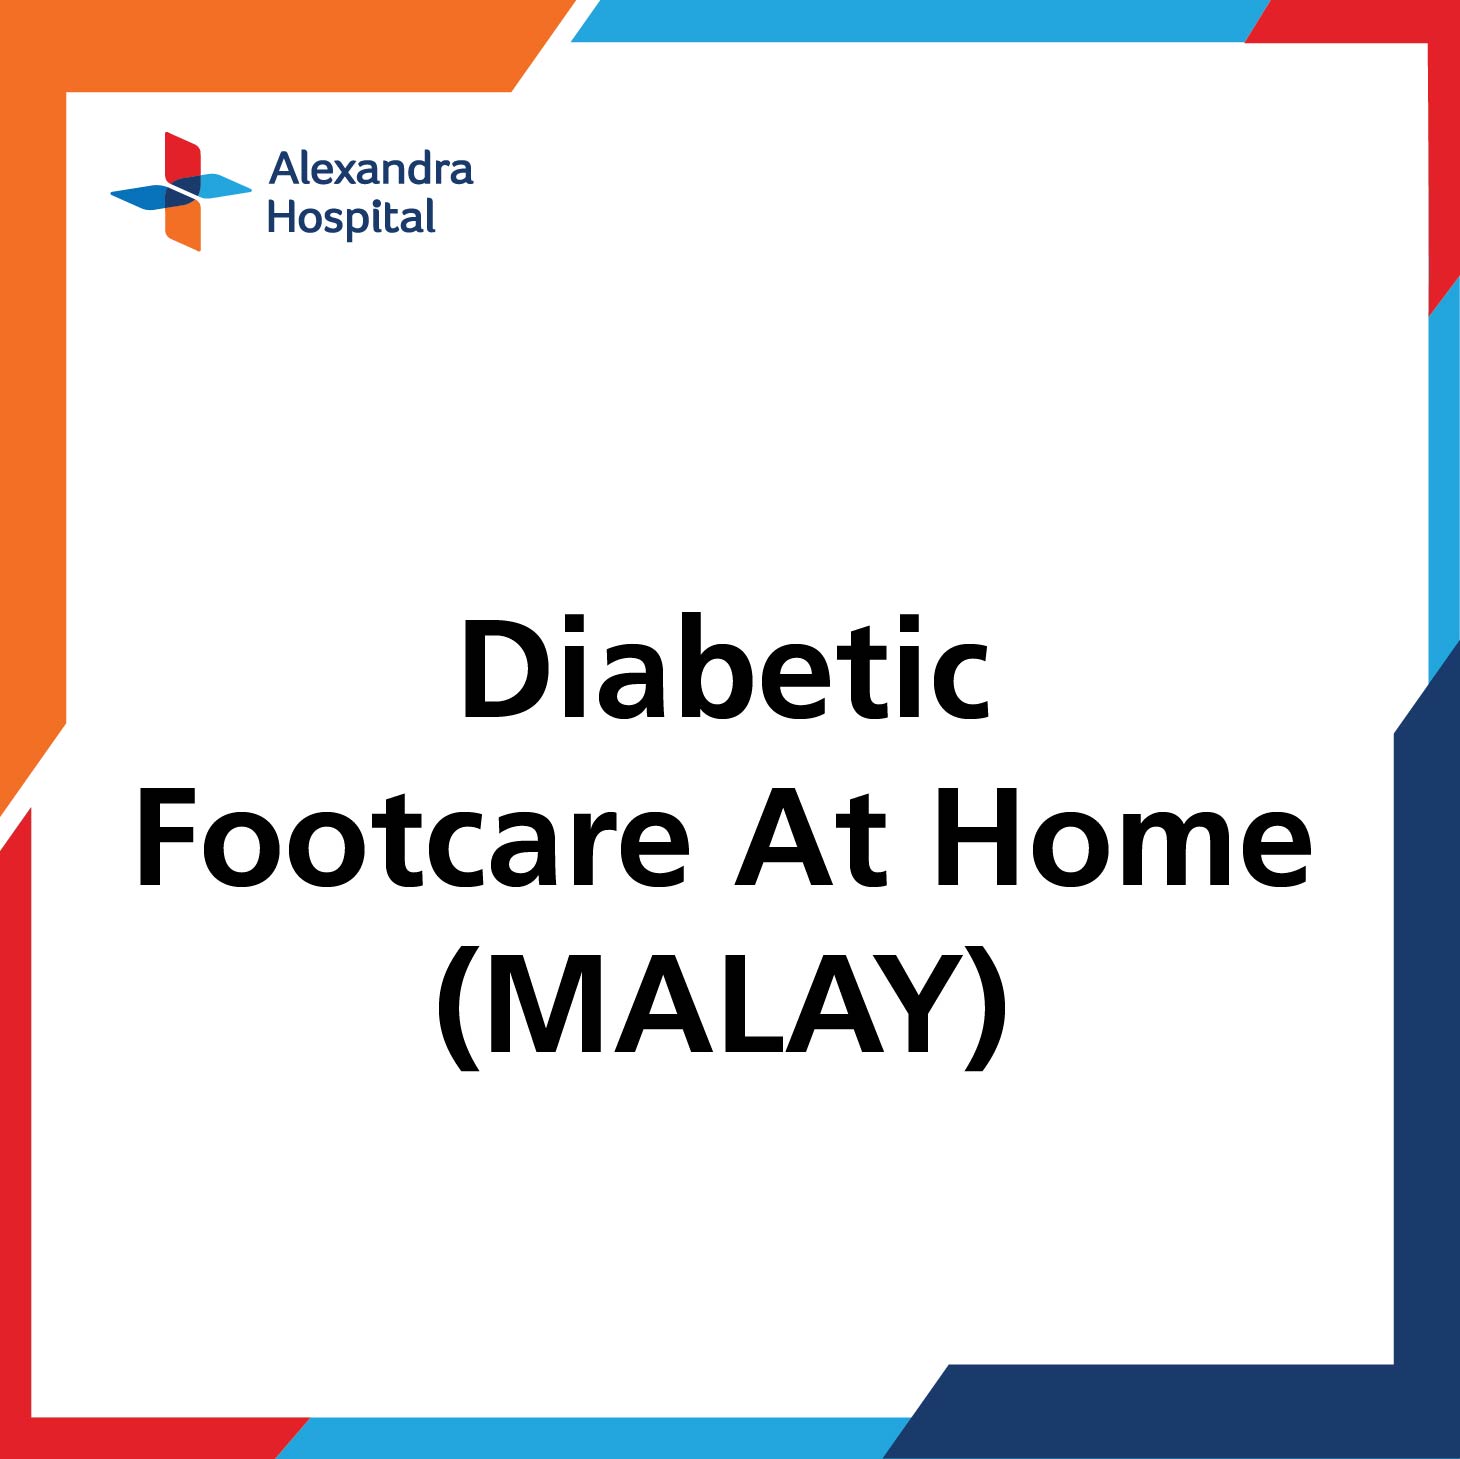 POD - Diabetic Footcare at Home (Malay)